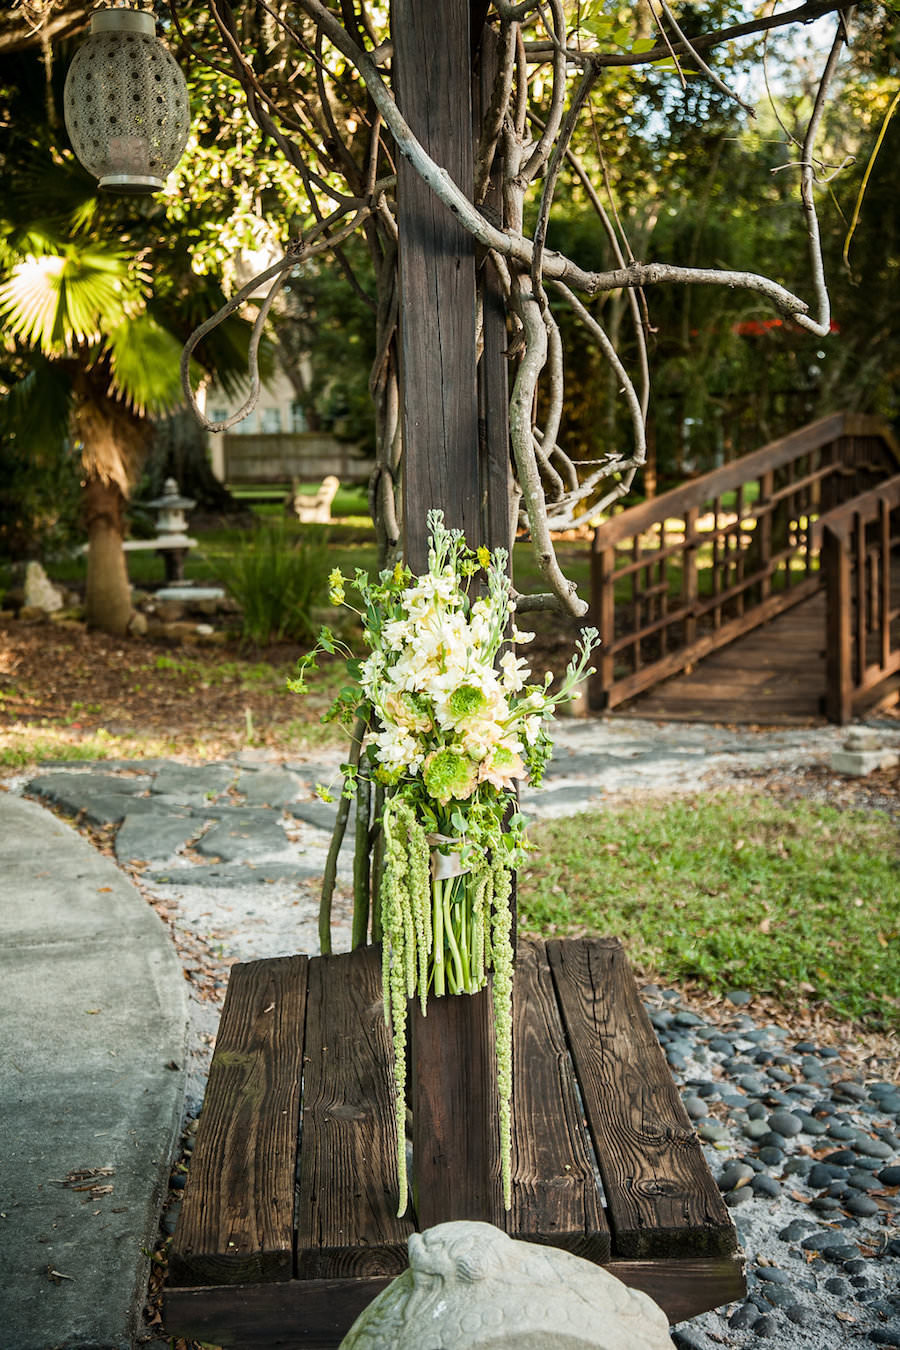 St. Petersburg Outdoor Wedding Reception Floral Decor with White and Green Flowers | St. Petersburg Florist Wonderland Floral Art and Gift Loft